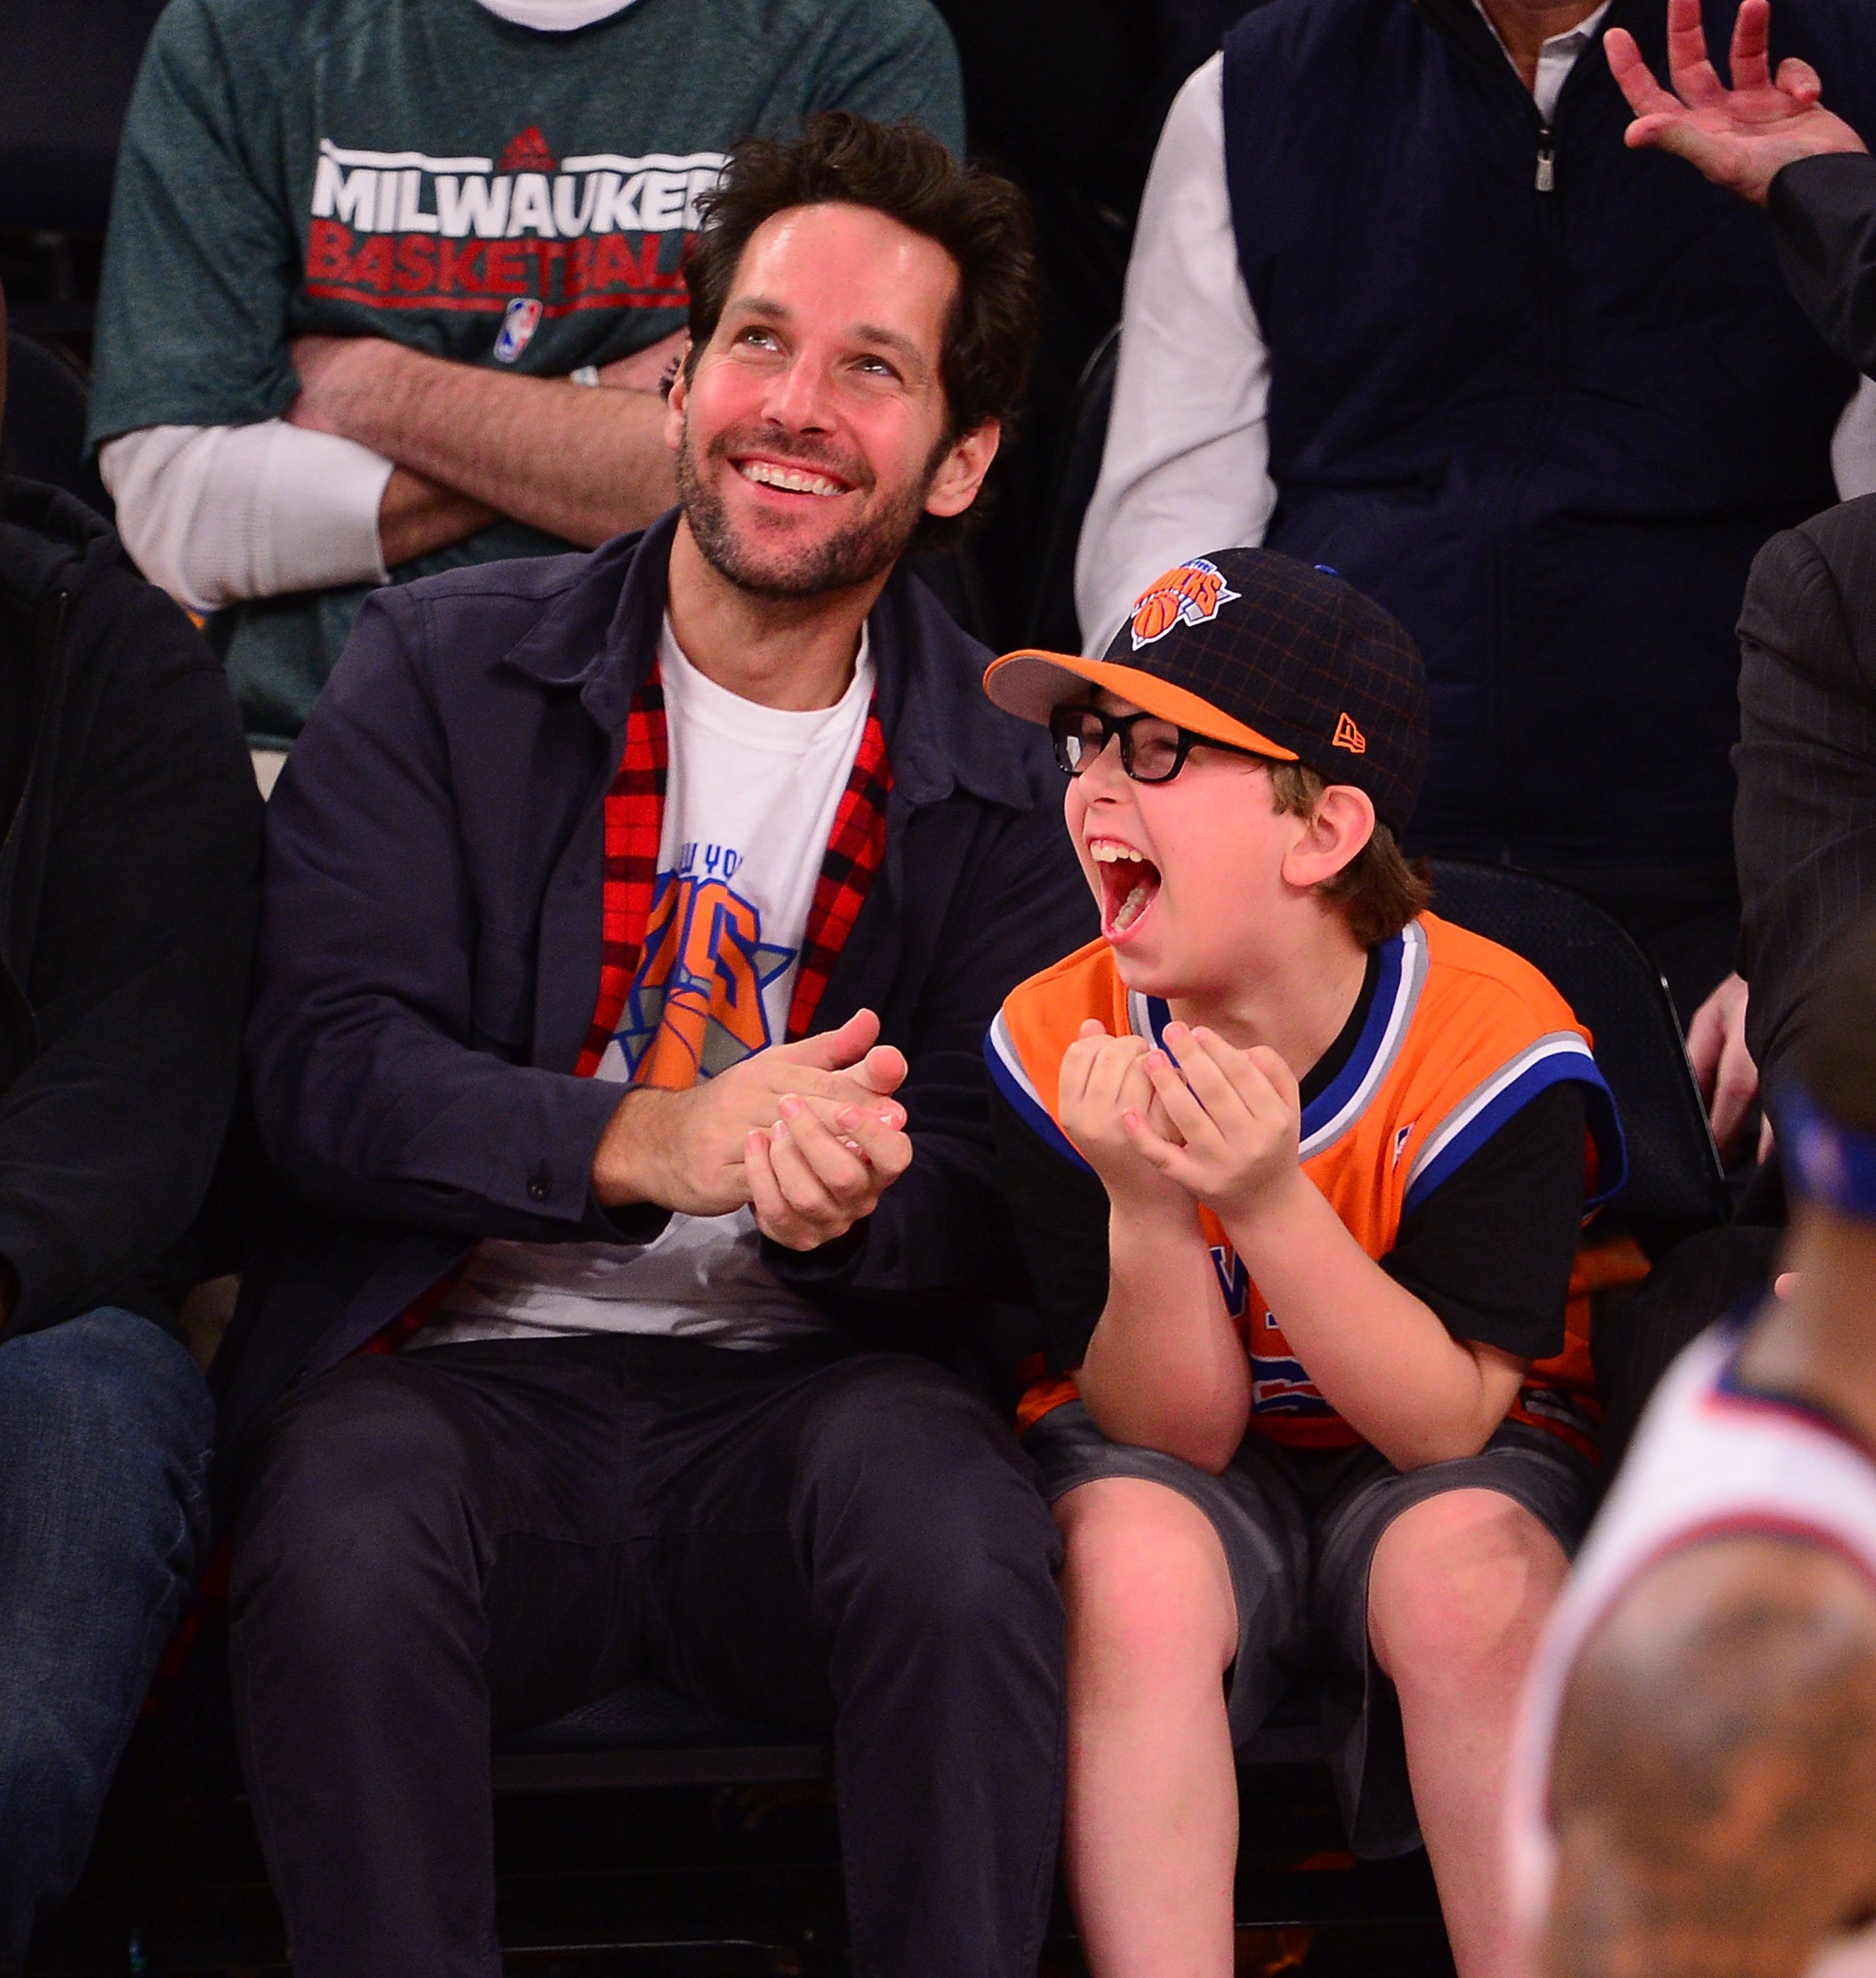 Paul Rudd and son Jack Rudd at Madison Square Garden on October 30, 2013, in New York City. | Source: Getty Images